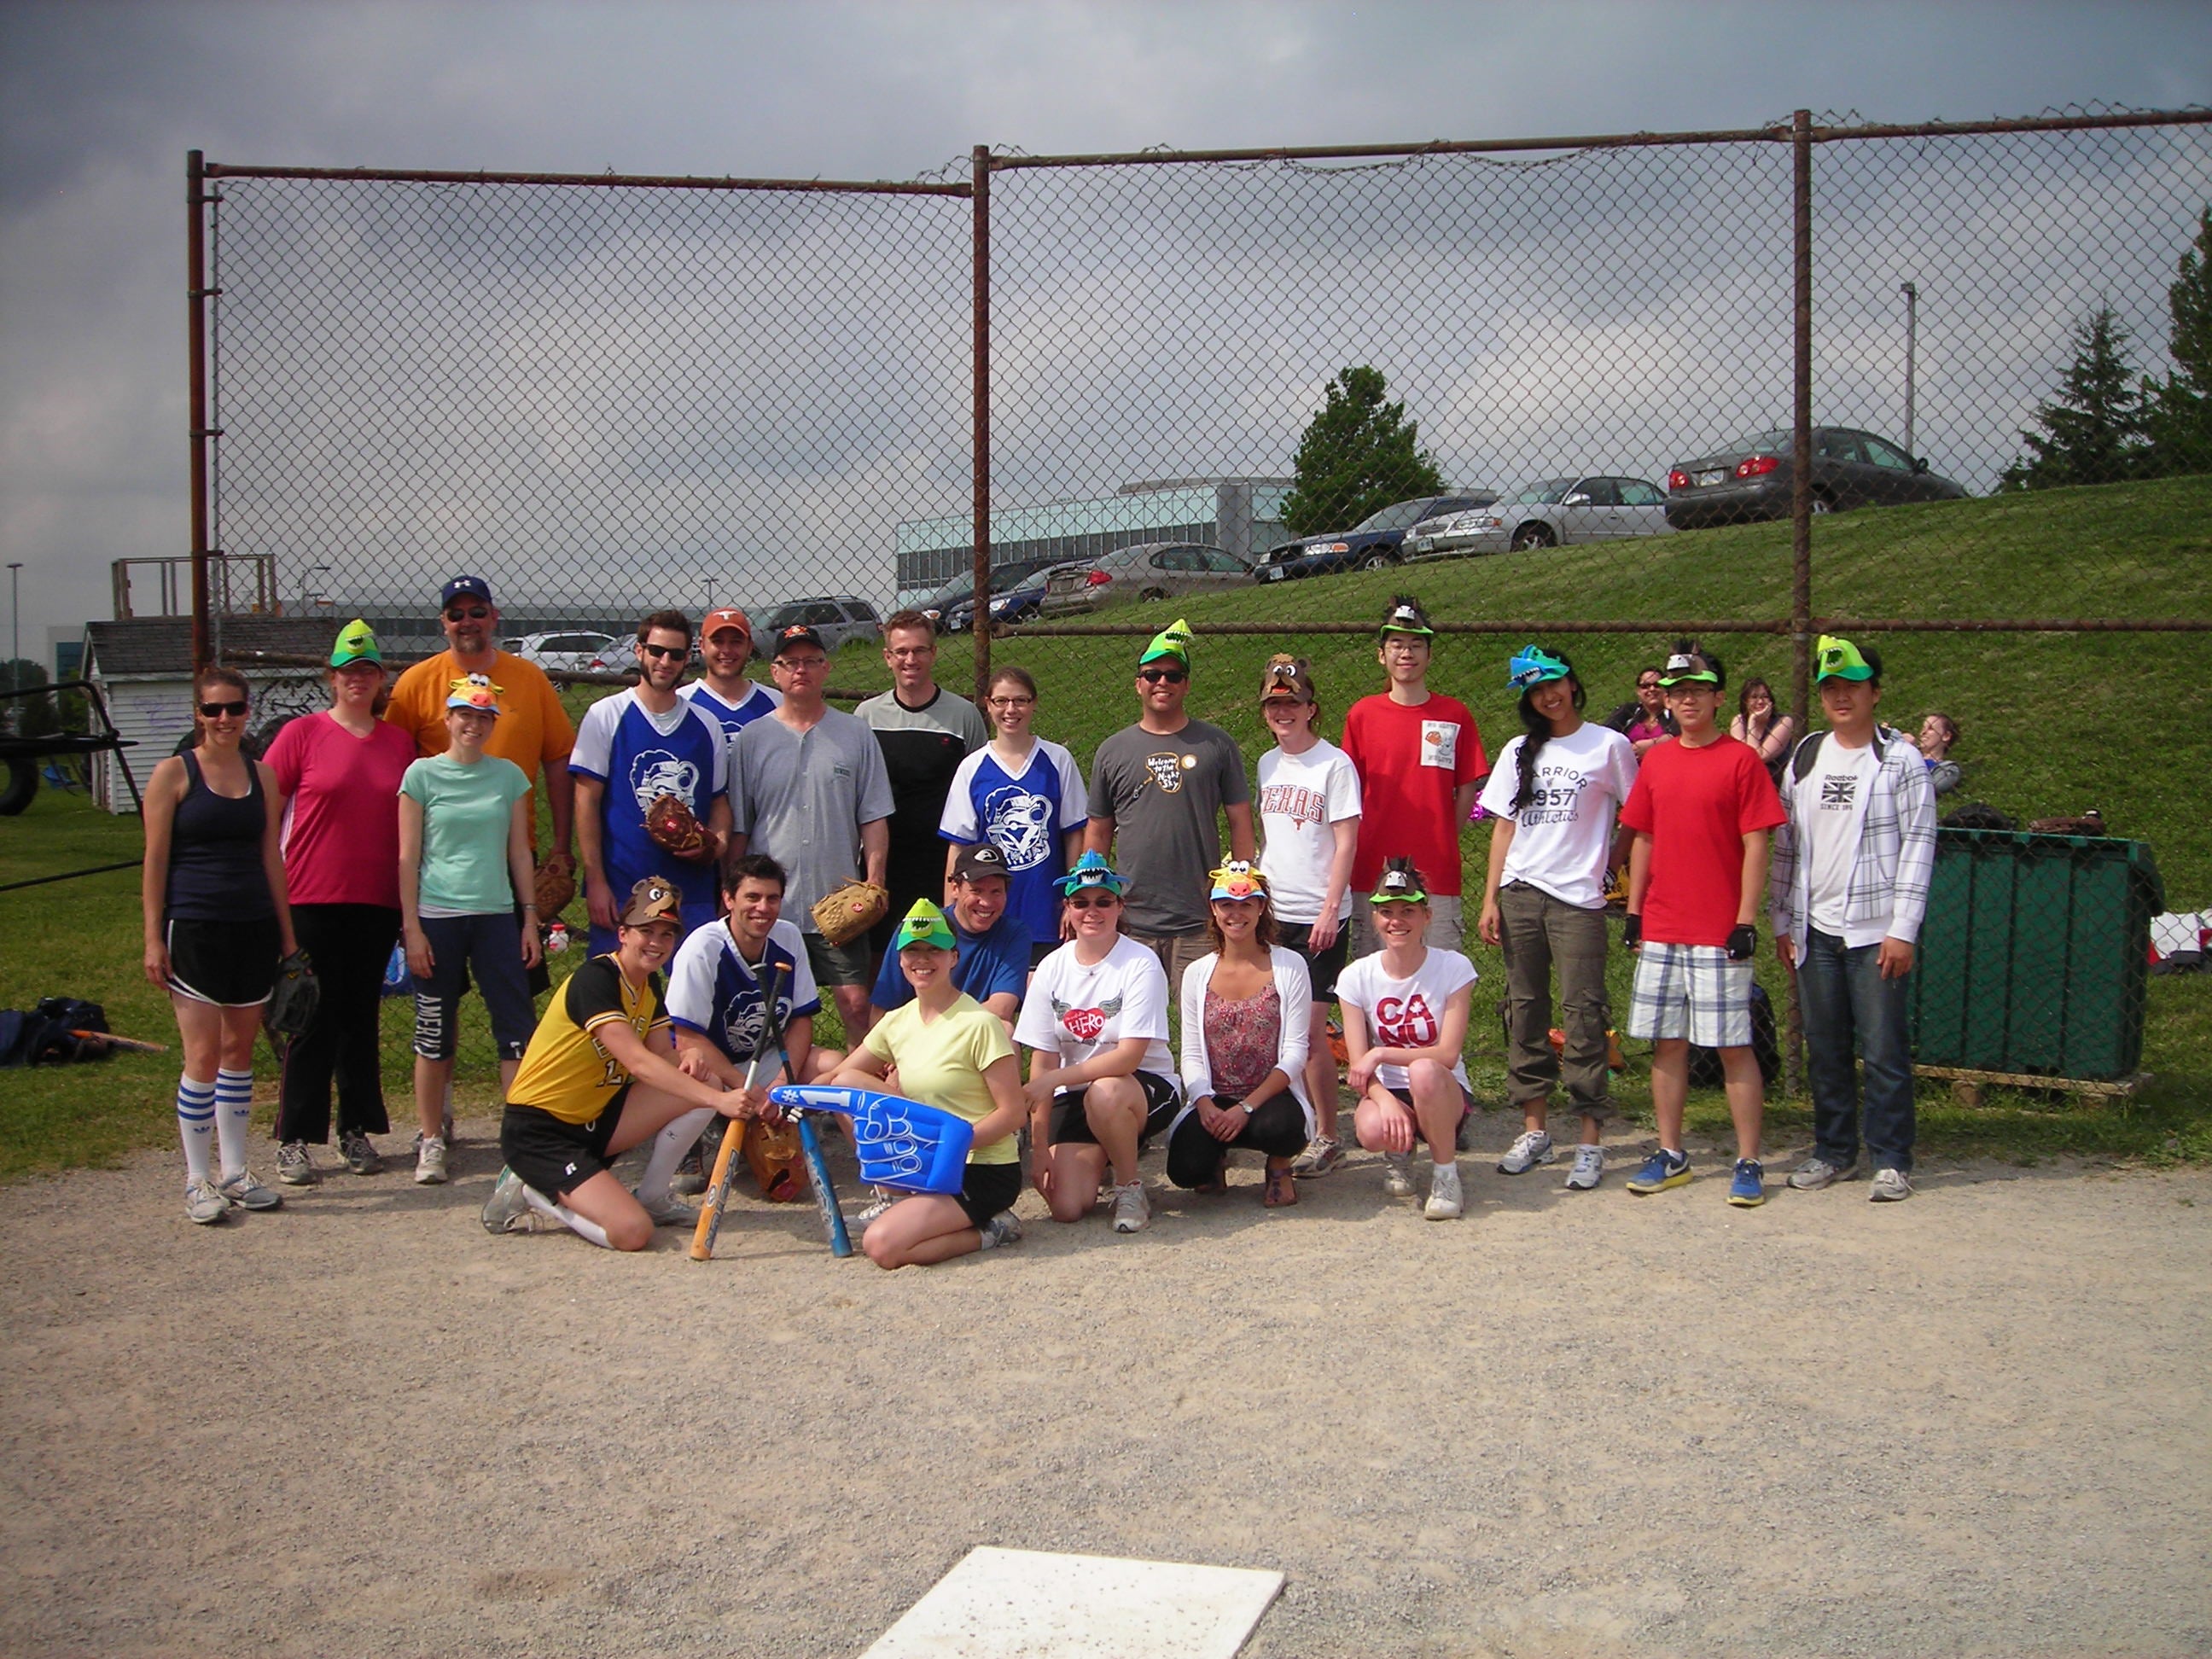 Group picture from the 2011 Softball Game